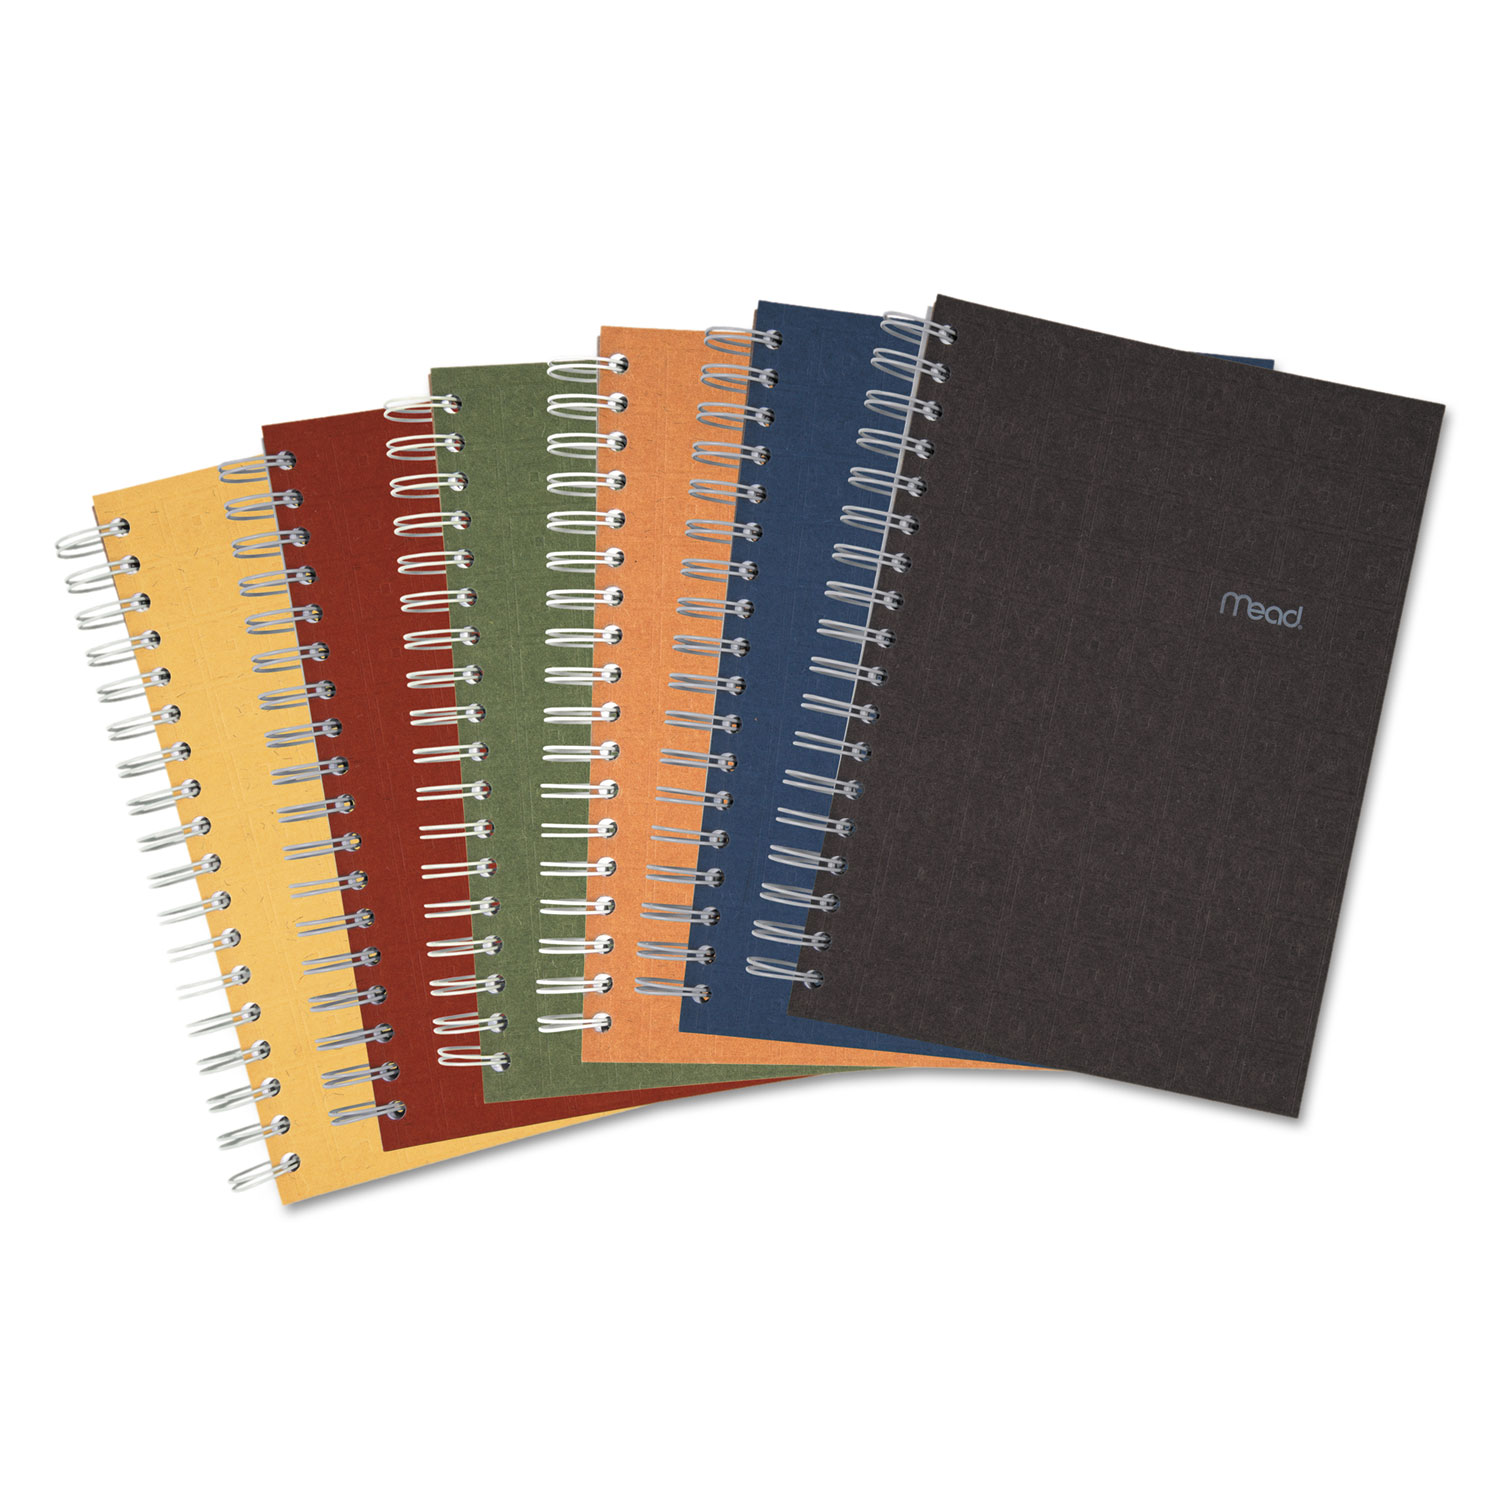  Mead 06674 Recycled Notebook, 1 Subject, Medium/College Rule, Assorted Color Covers, 9.5 x 6, 120 Sheets (MEA06674) 